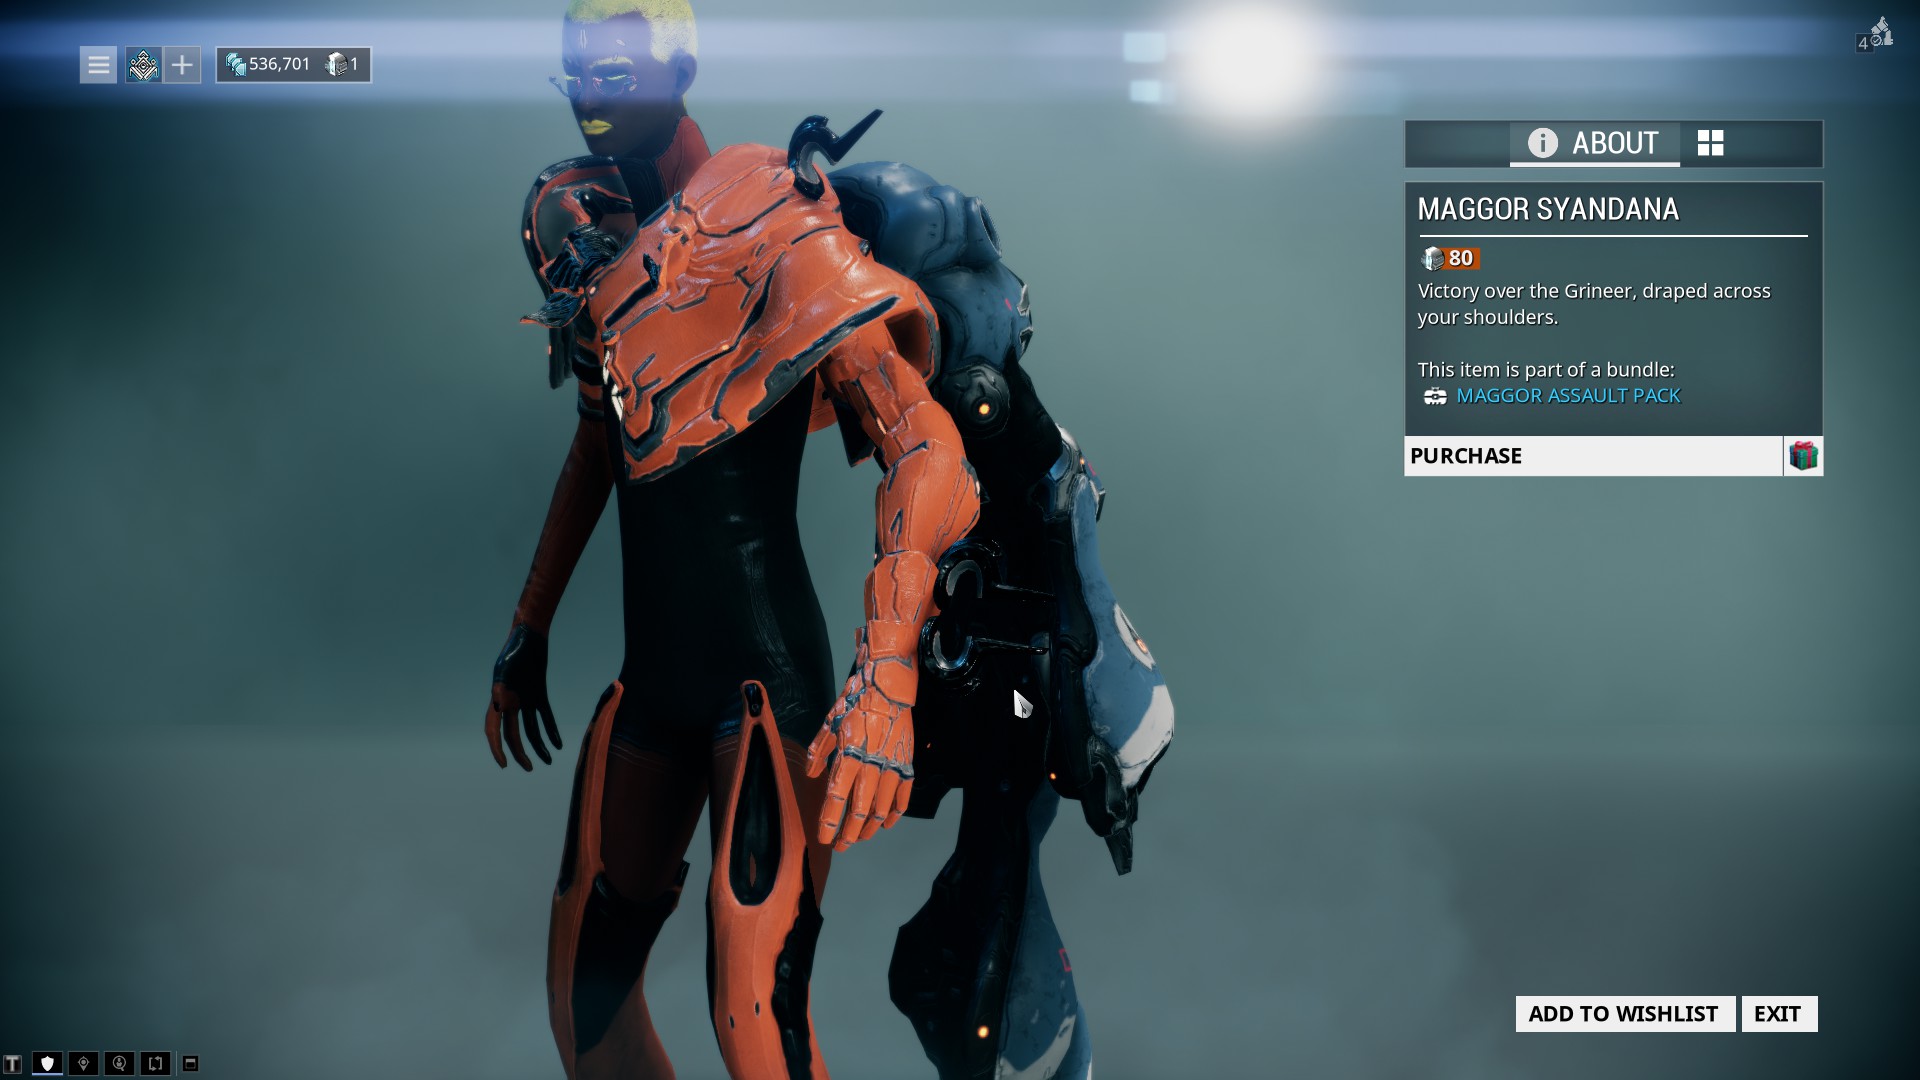 Door glitch in the ship - PC Bugs - Warframe Forums